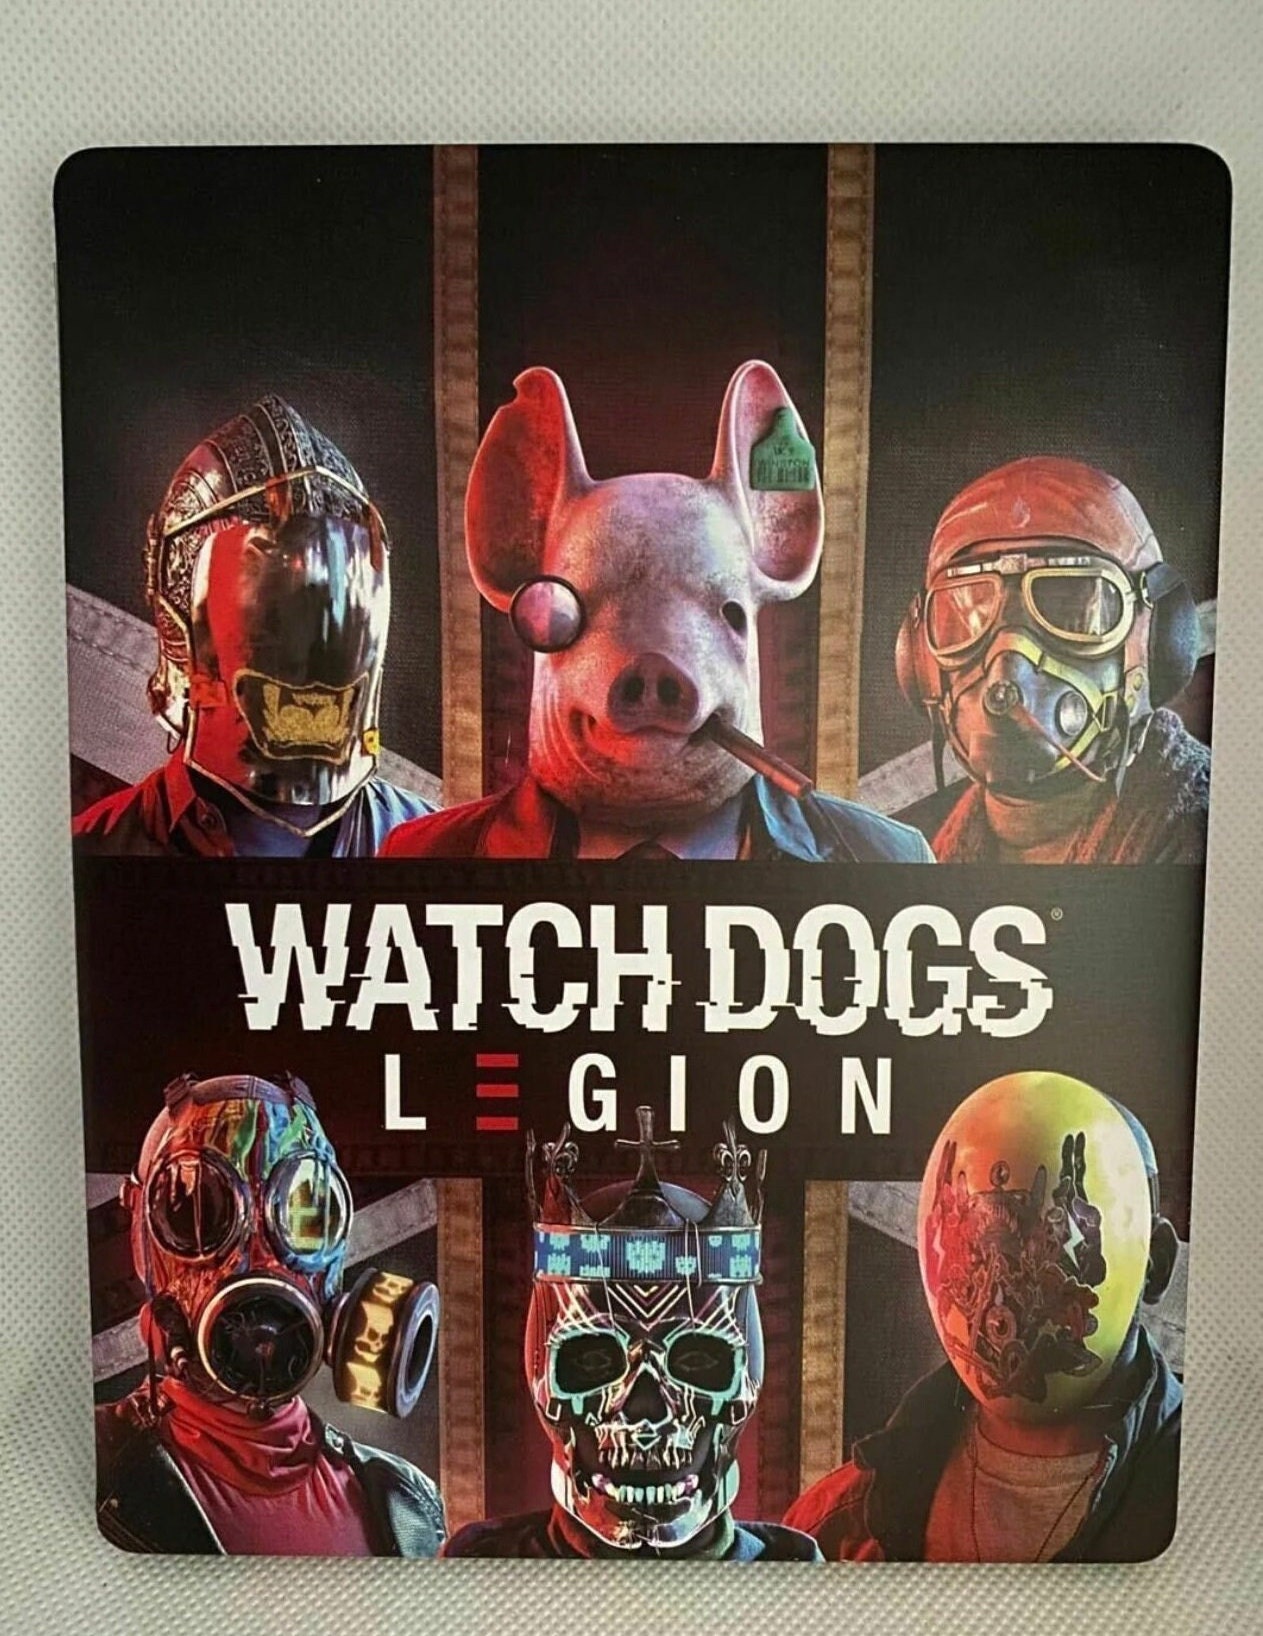 Sleeping Dogs Custom Made Steelbook Case for PS4/PS5/Xbox Case